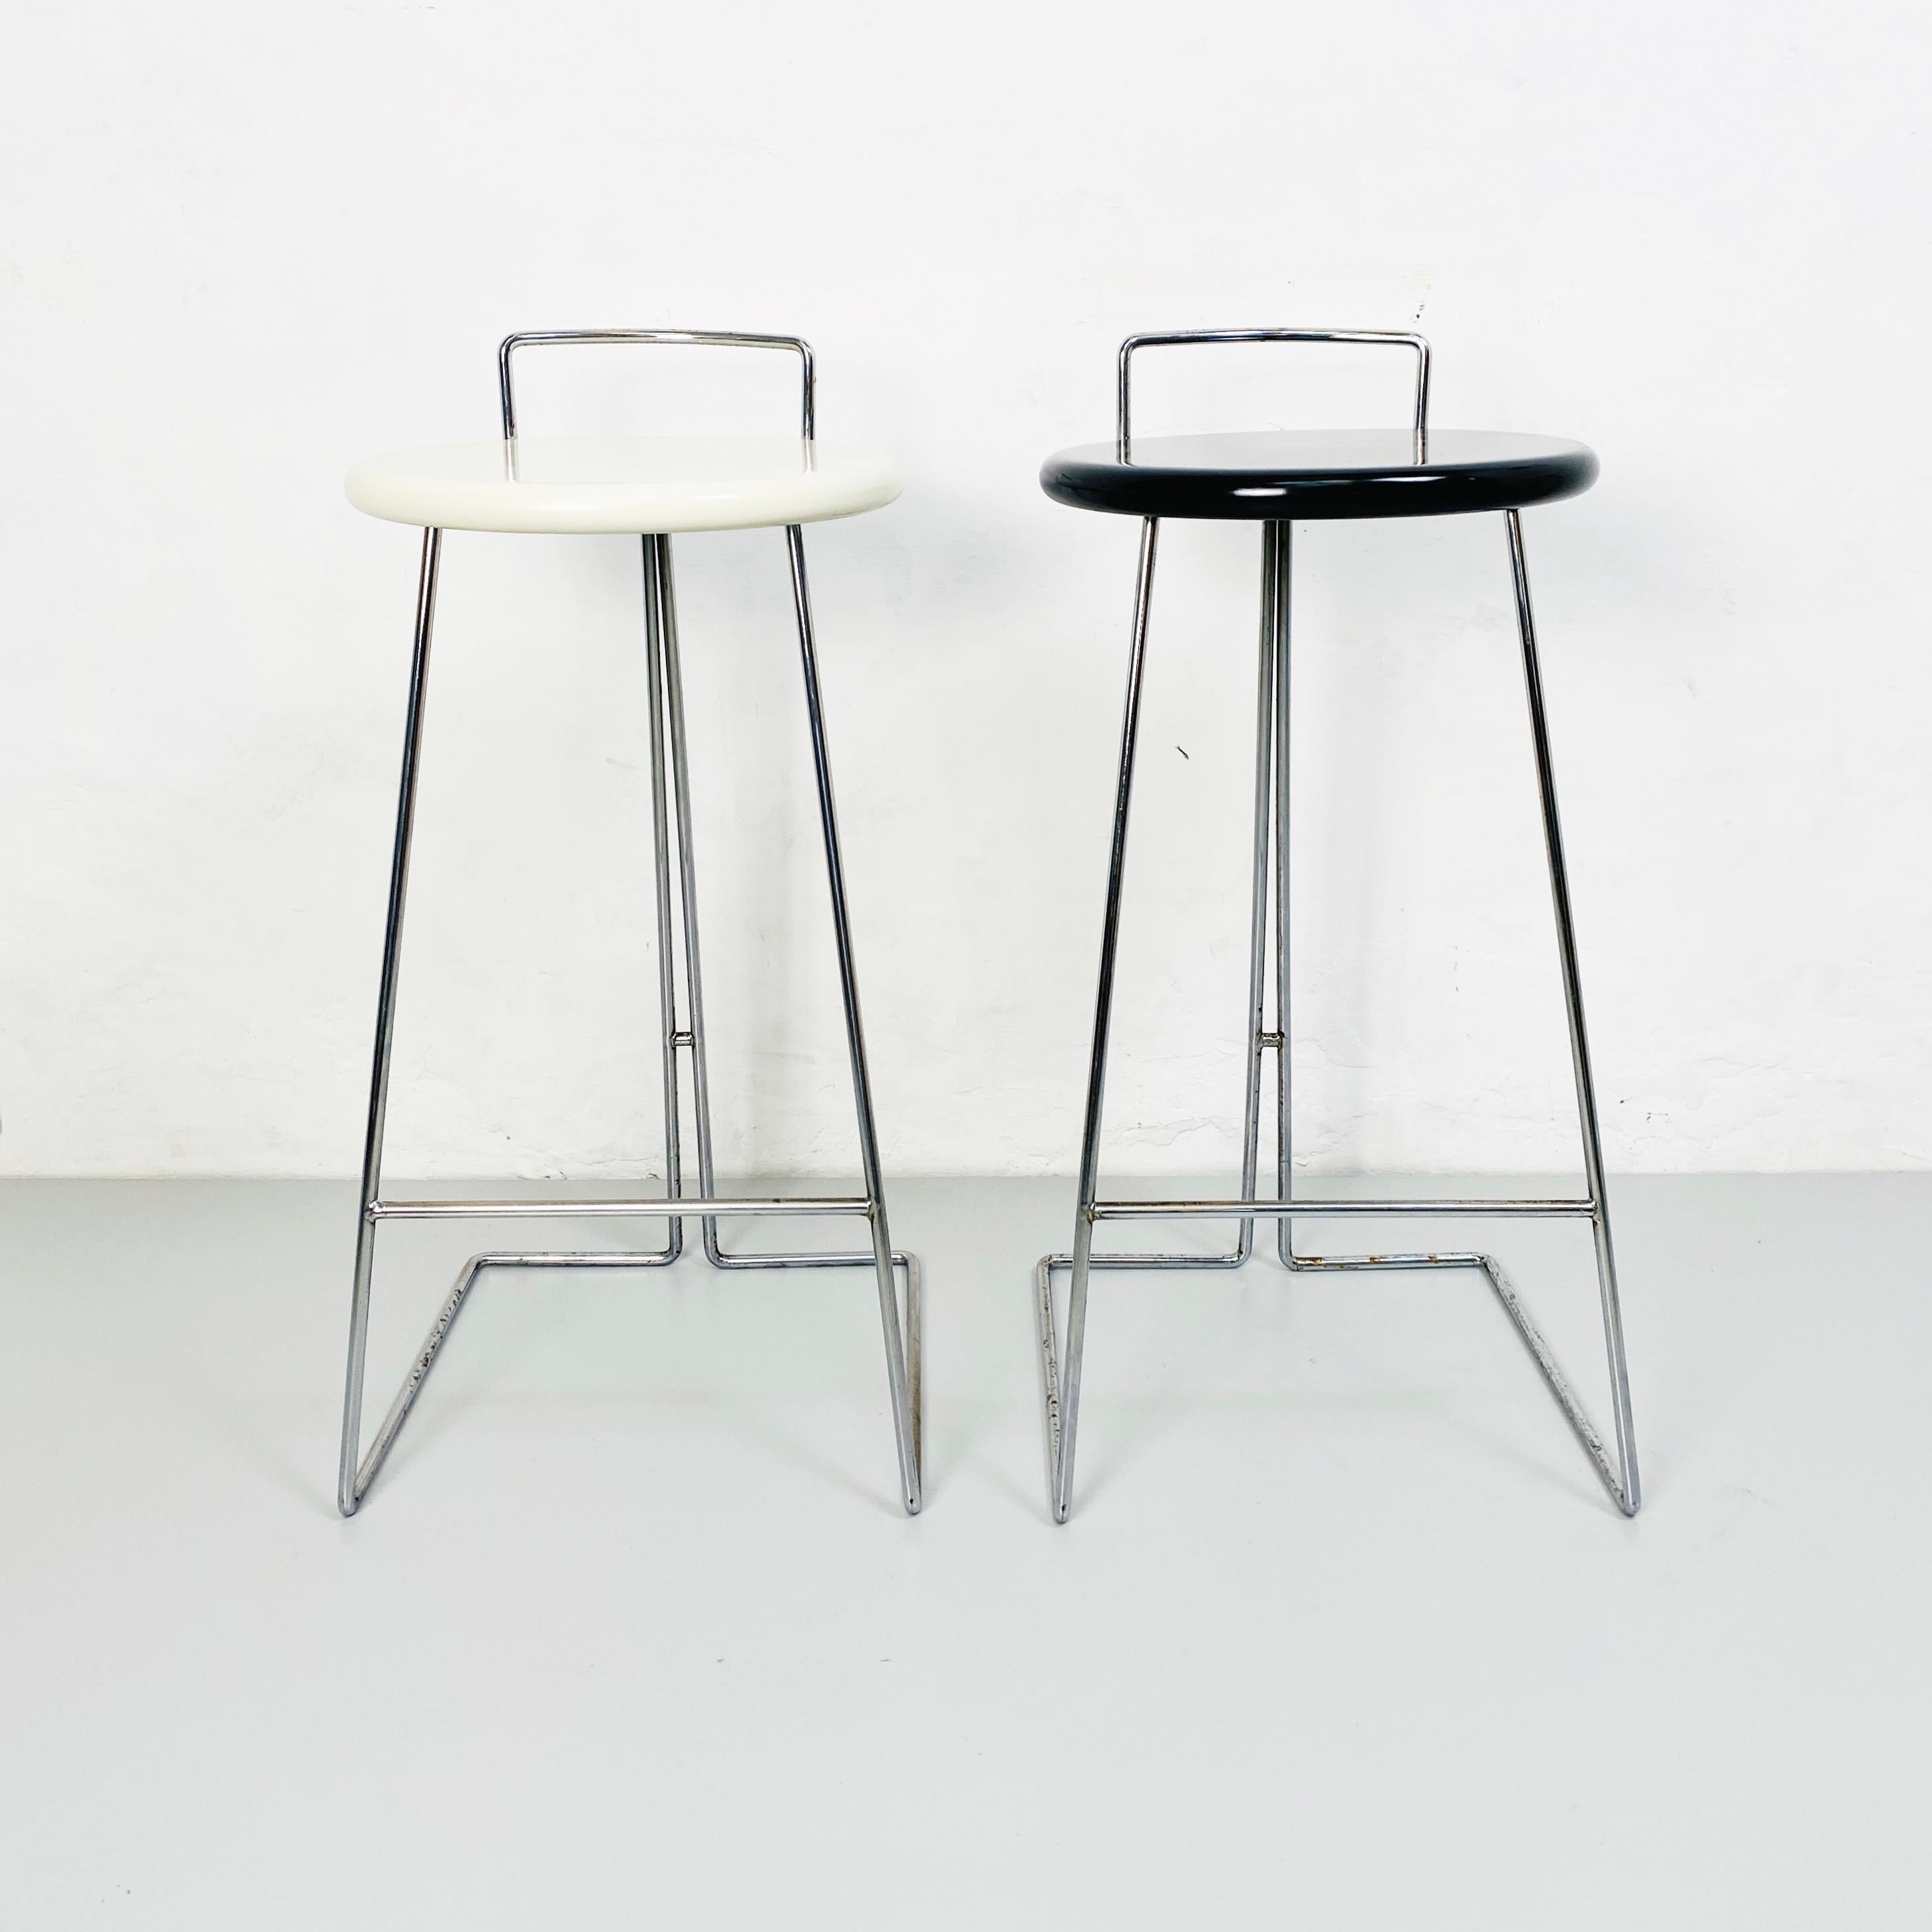 Late 20th Century Italian Set of Black and White Chromed Metal Stools by Dada, Italy, 1980s